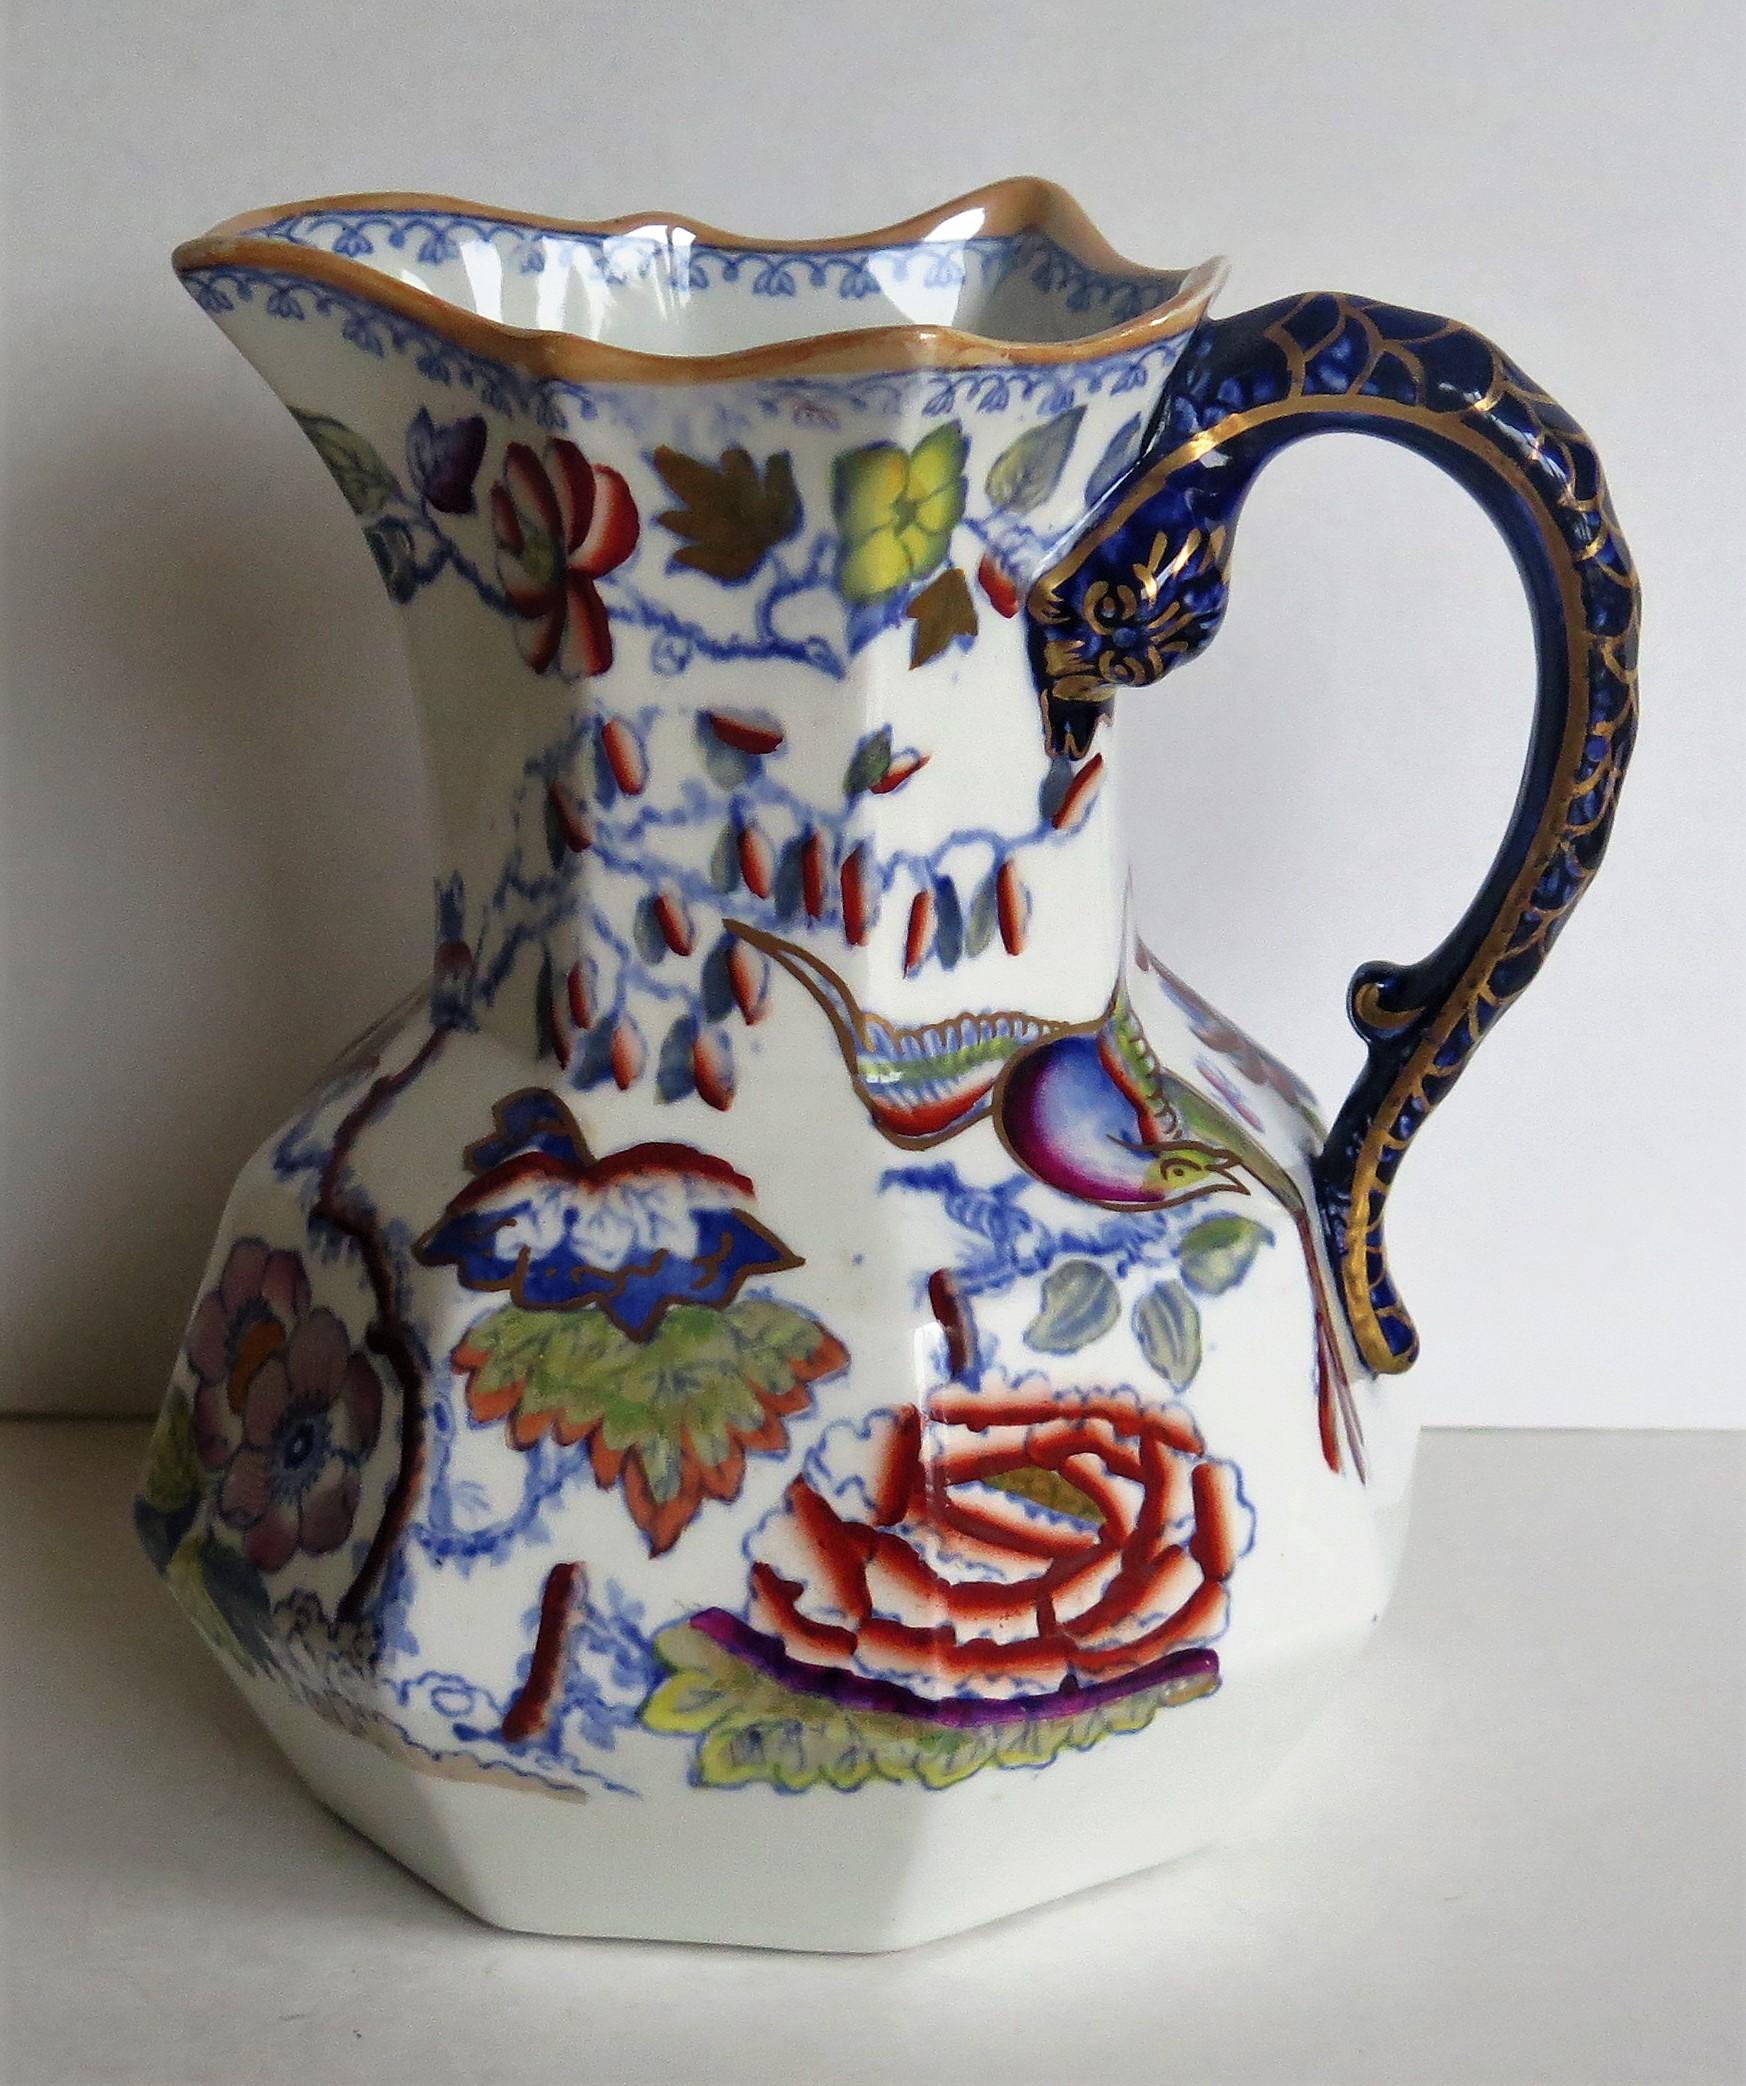 This is a very good mid size Hydra Jug or Pitcher by Mason's Ironstone, England, circa 1870.

The jug has an octagonal form in the hydra shape with a looping snake handle. 

This jug has one of the very decorative oriental, chinoiserie patterns